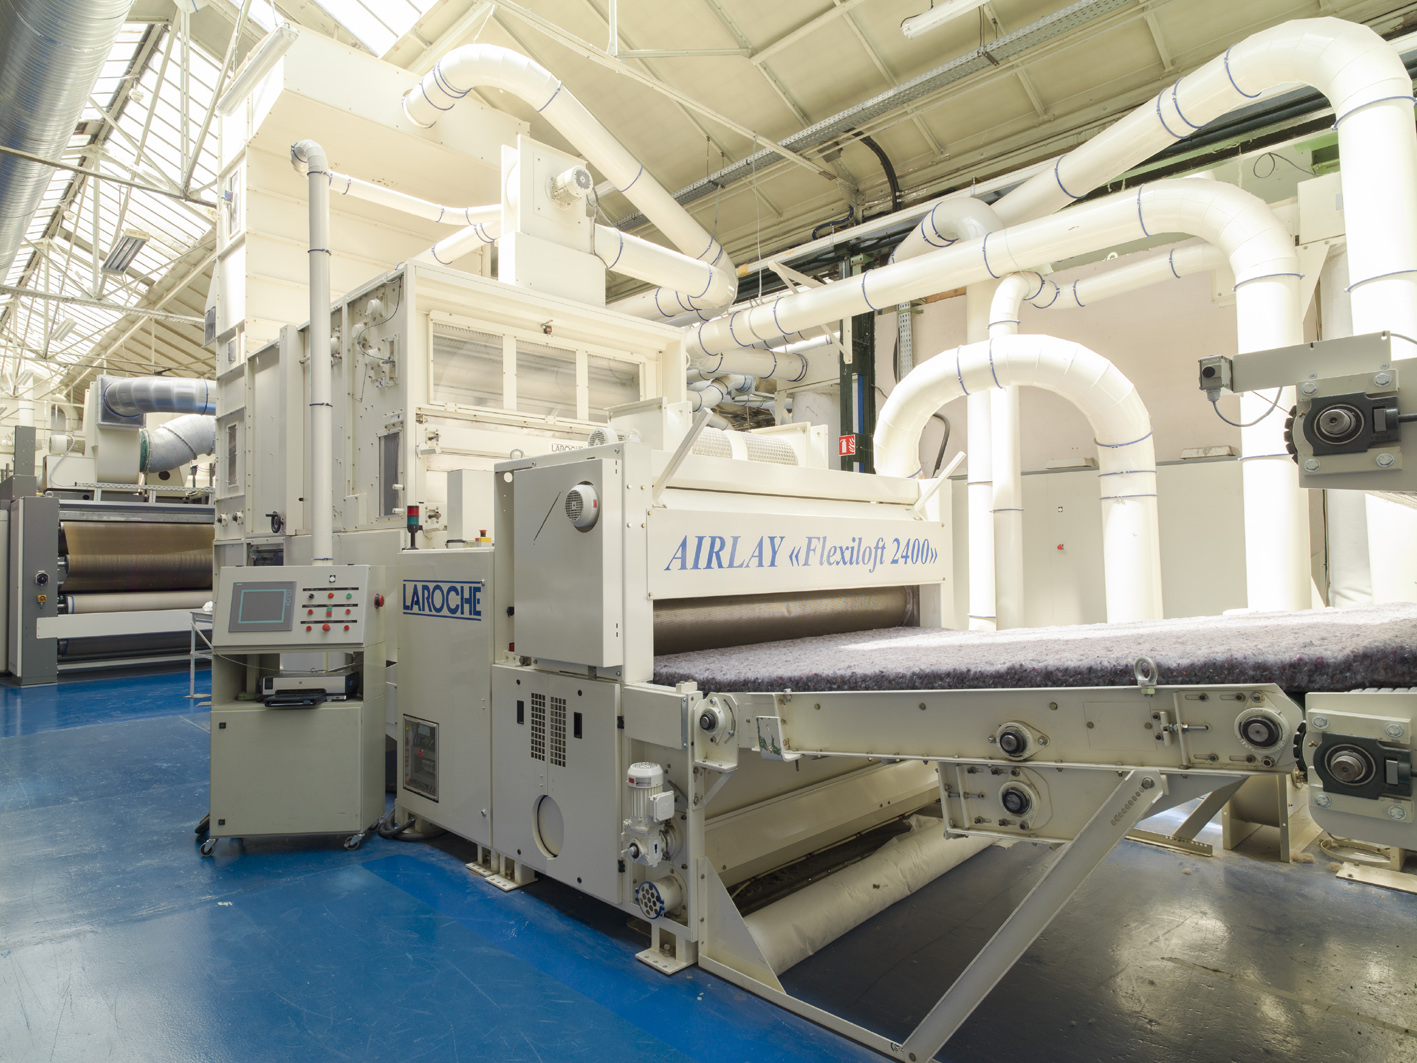 Laroche develops fibre preparation machinery for the textile and nonwovens industries. © UCMTF